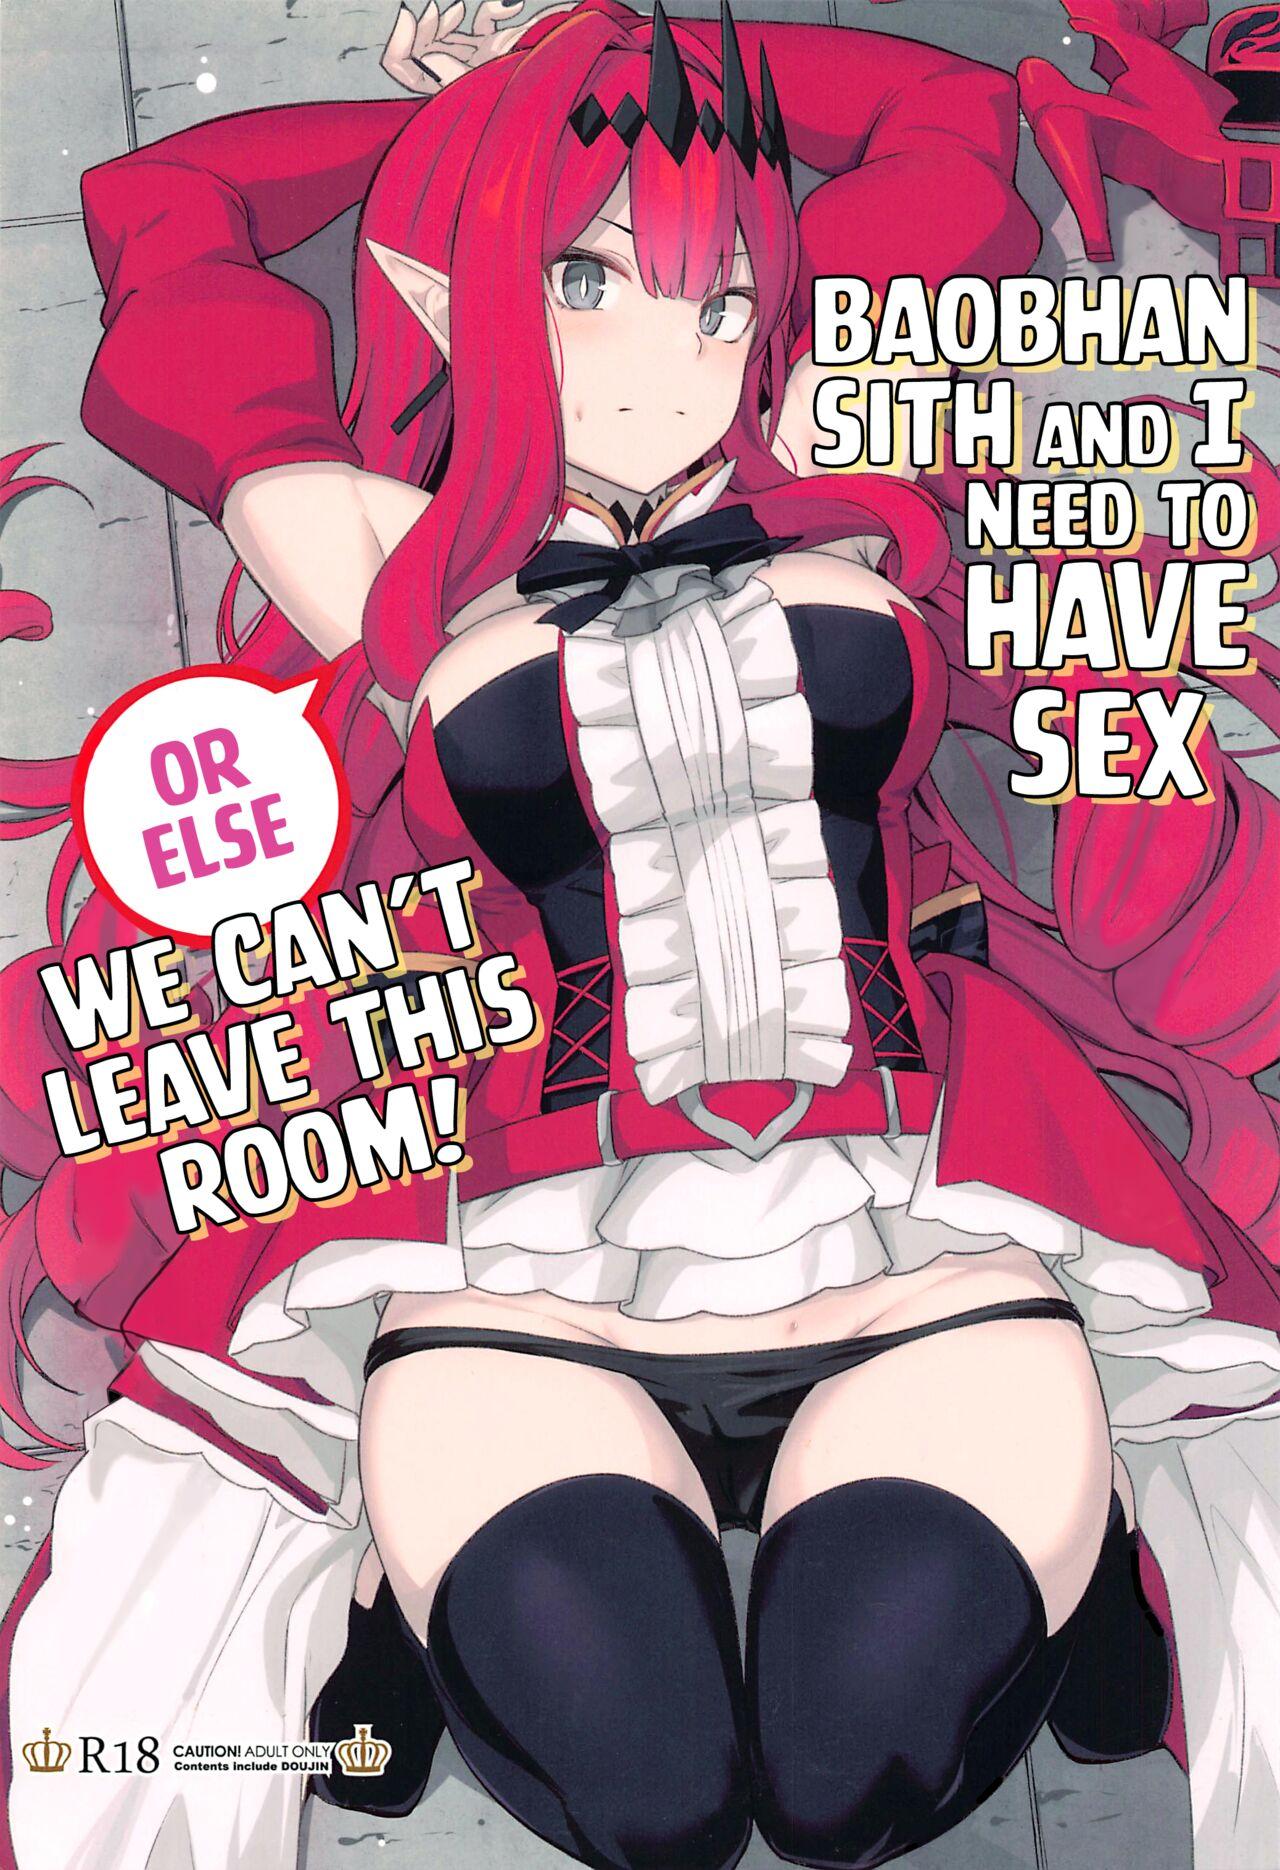 Pinoy Baobhan Sith to SEX Shinai to Derarenai Heya | Baobhan Sith and I Need to Have Sex or Else We Can't Leave This Room! - Fate grand order Women Sucking - Page 1